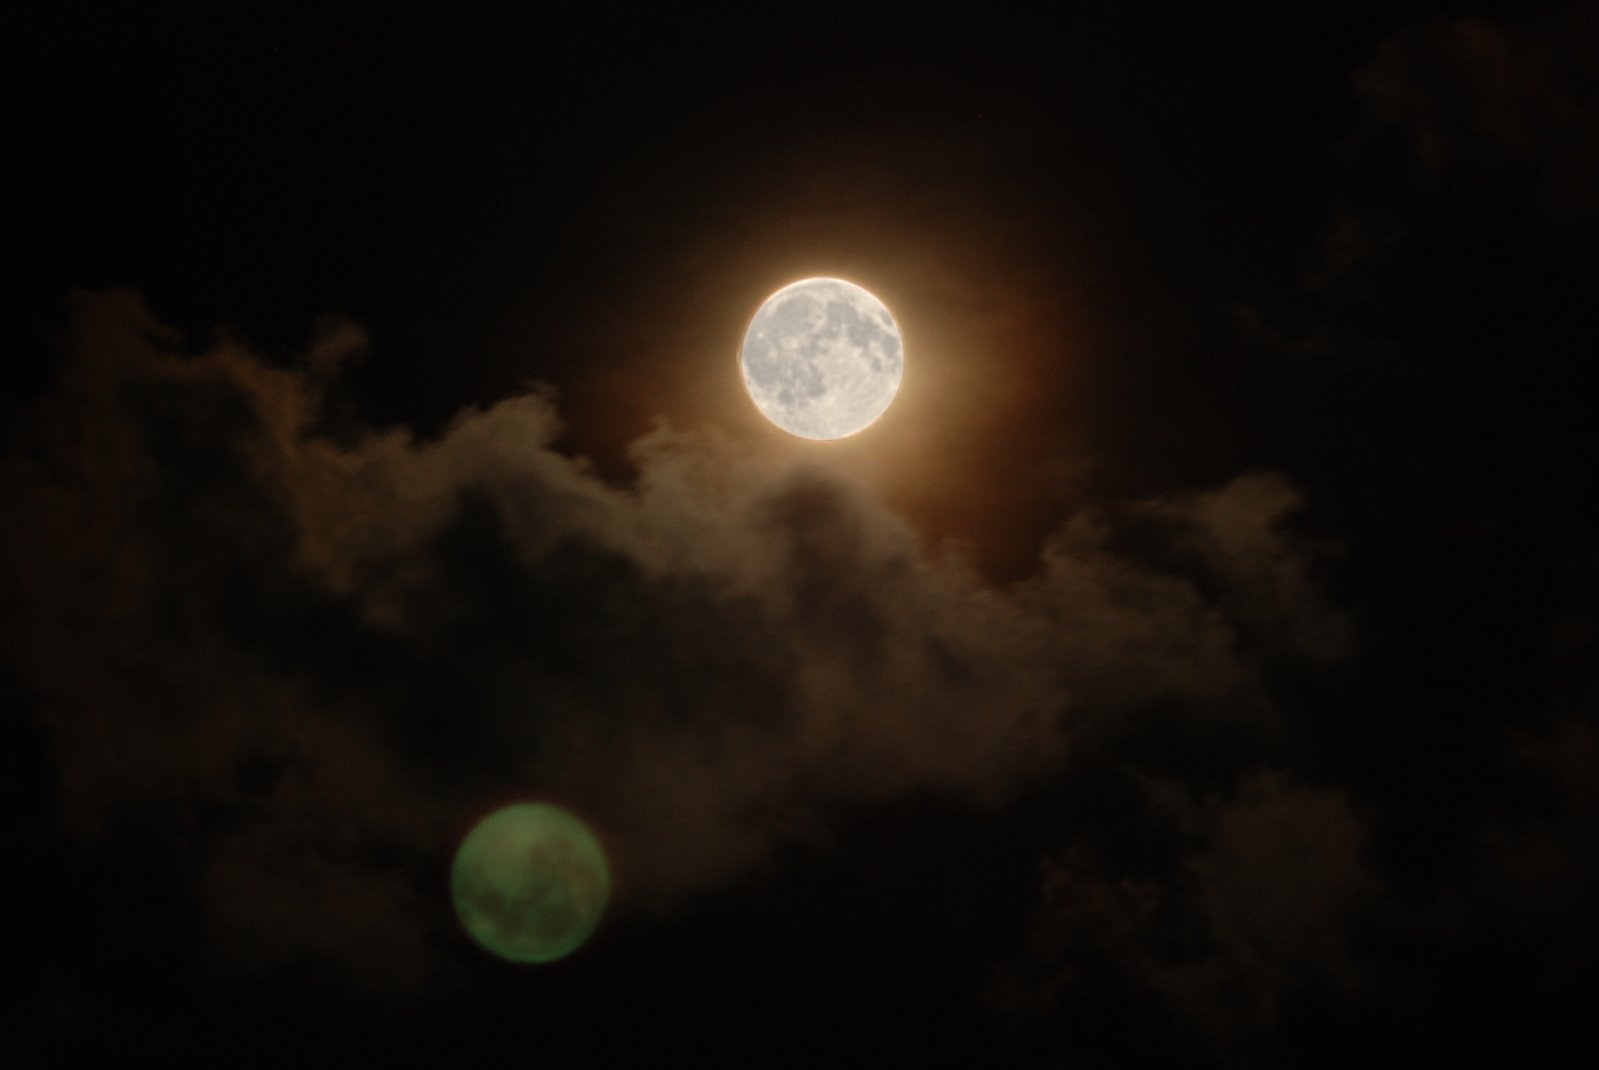 a full moon is seen in the dark sky above clouds